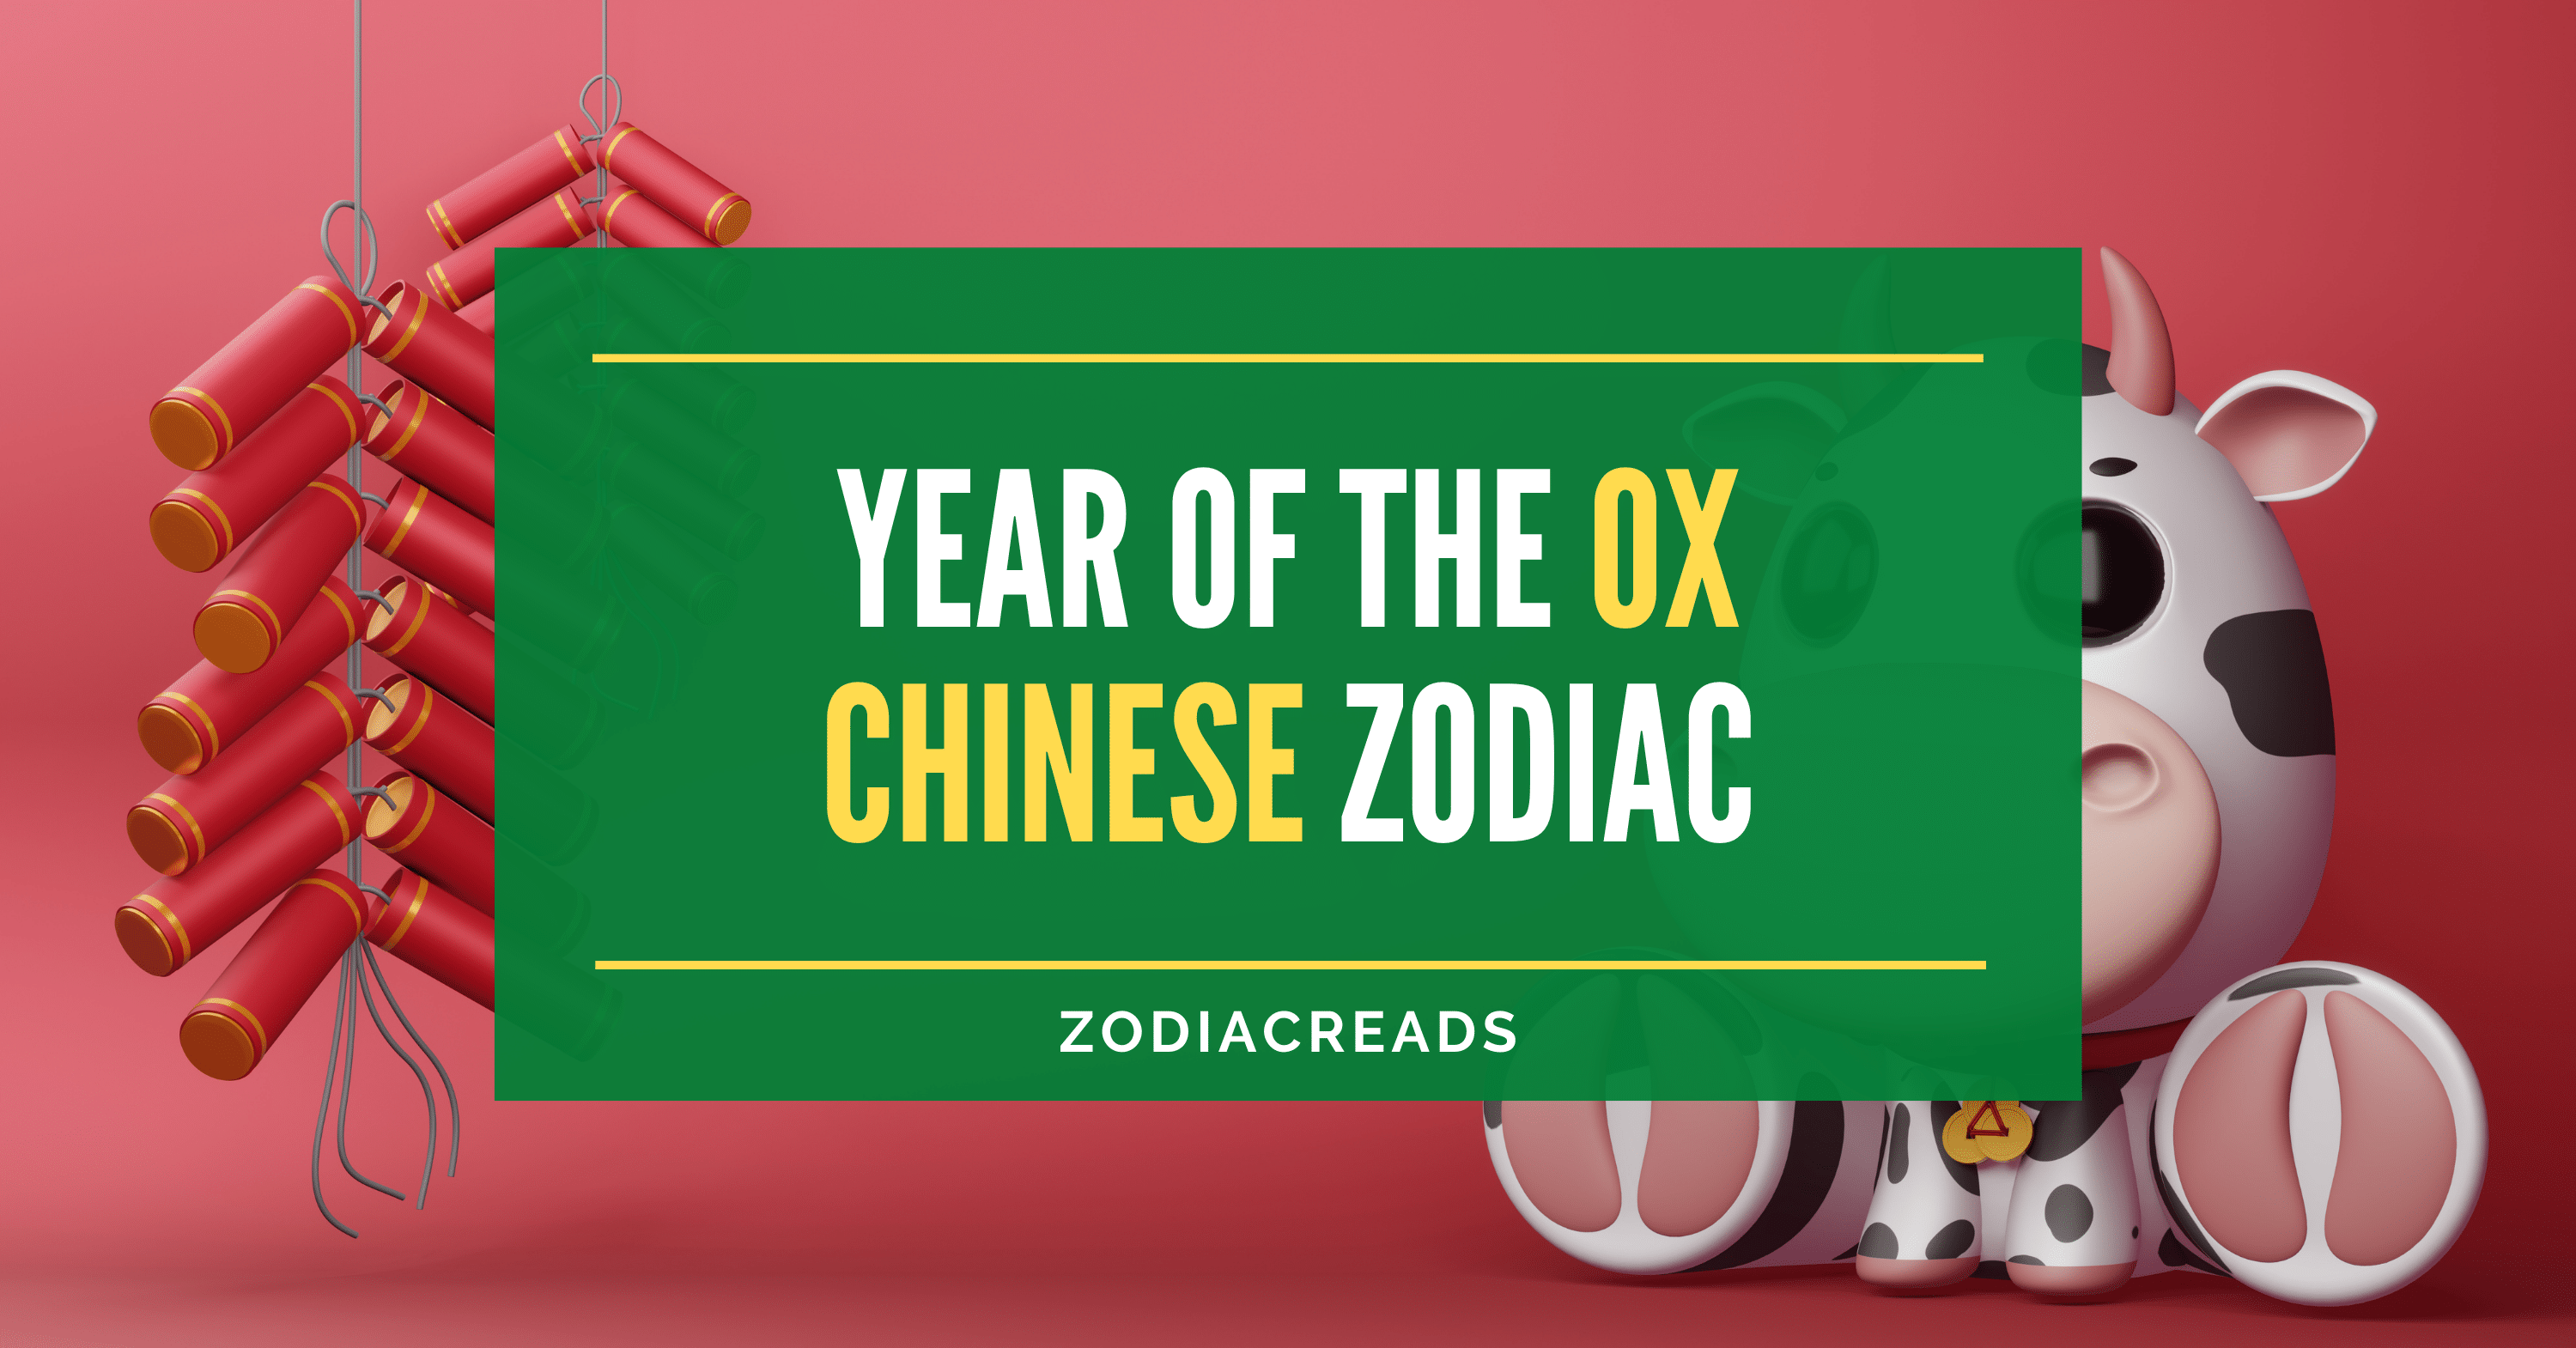 Year of the Ox Zodiacreads